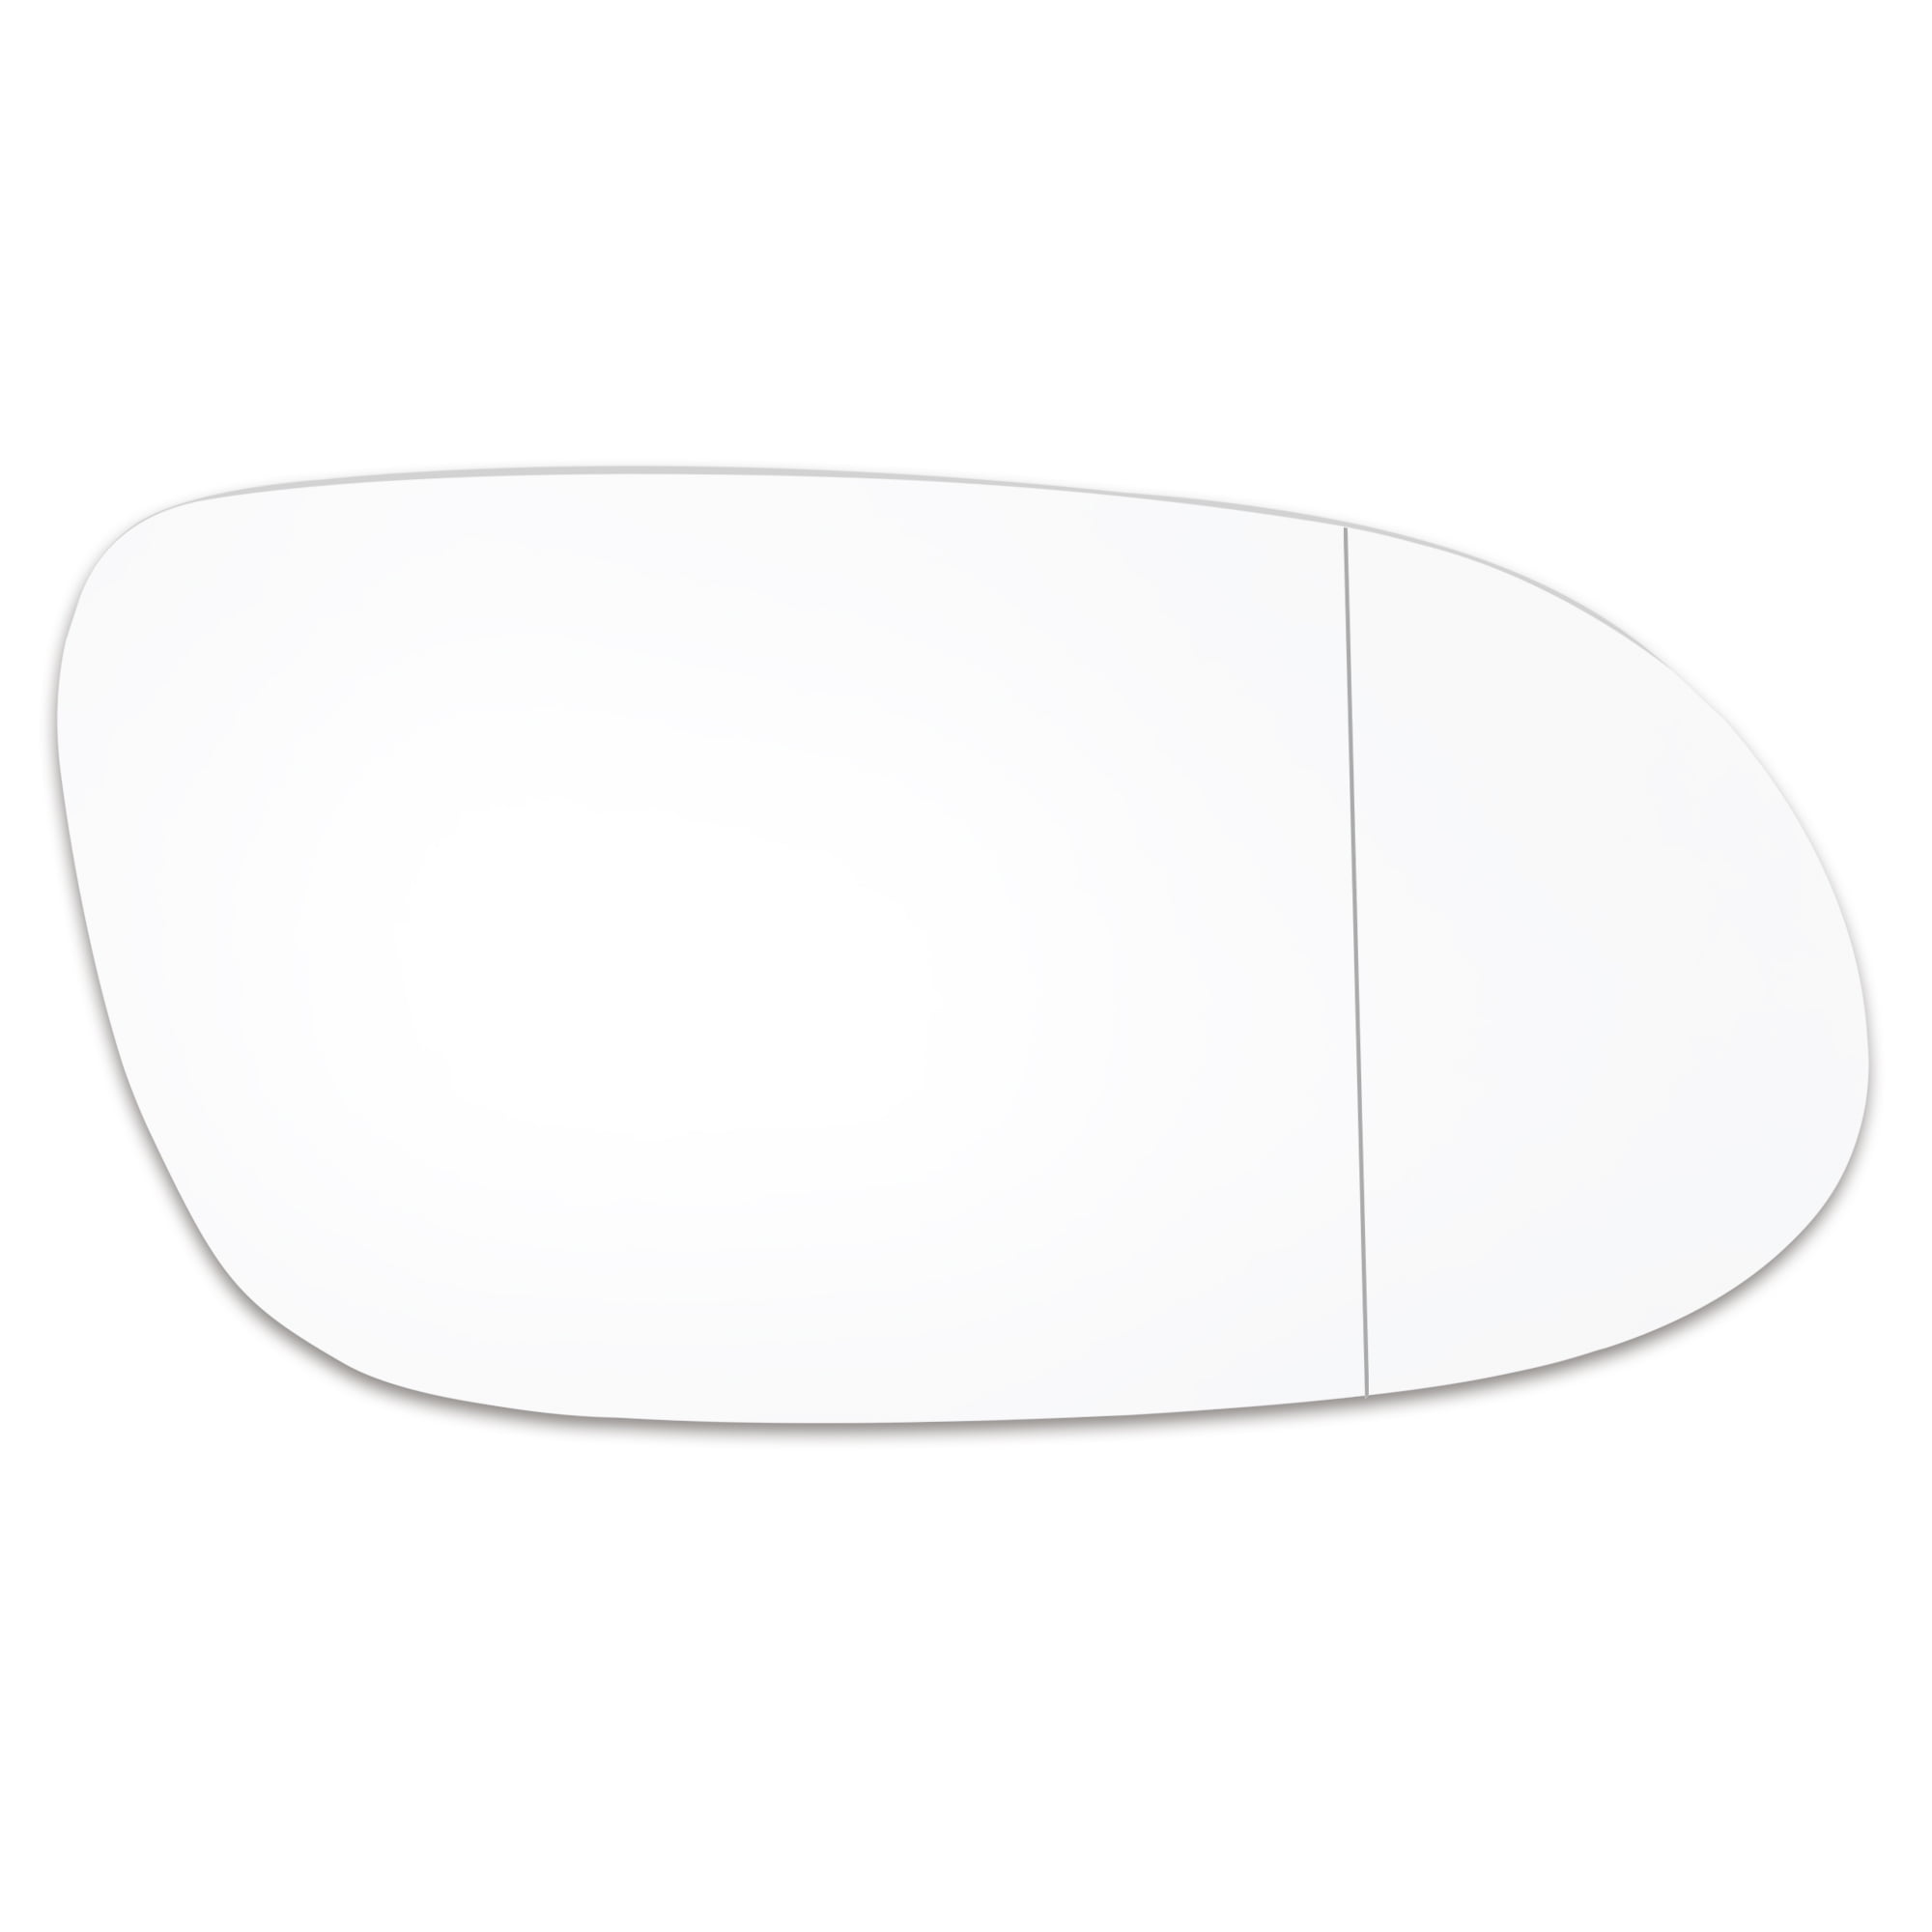 Right hand driver side for VW Bora 1998-2005 Wide Angle wing mirror glass